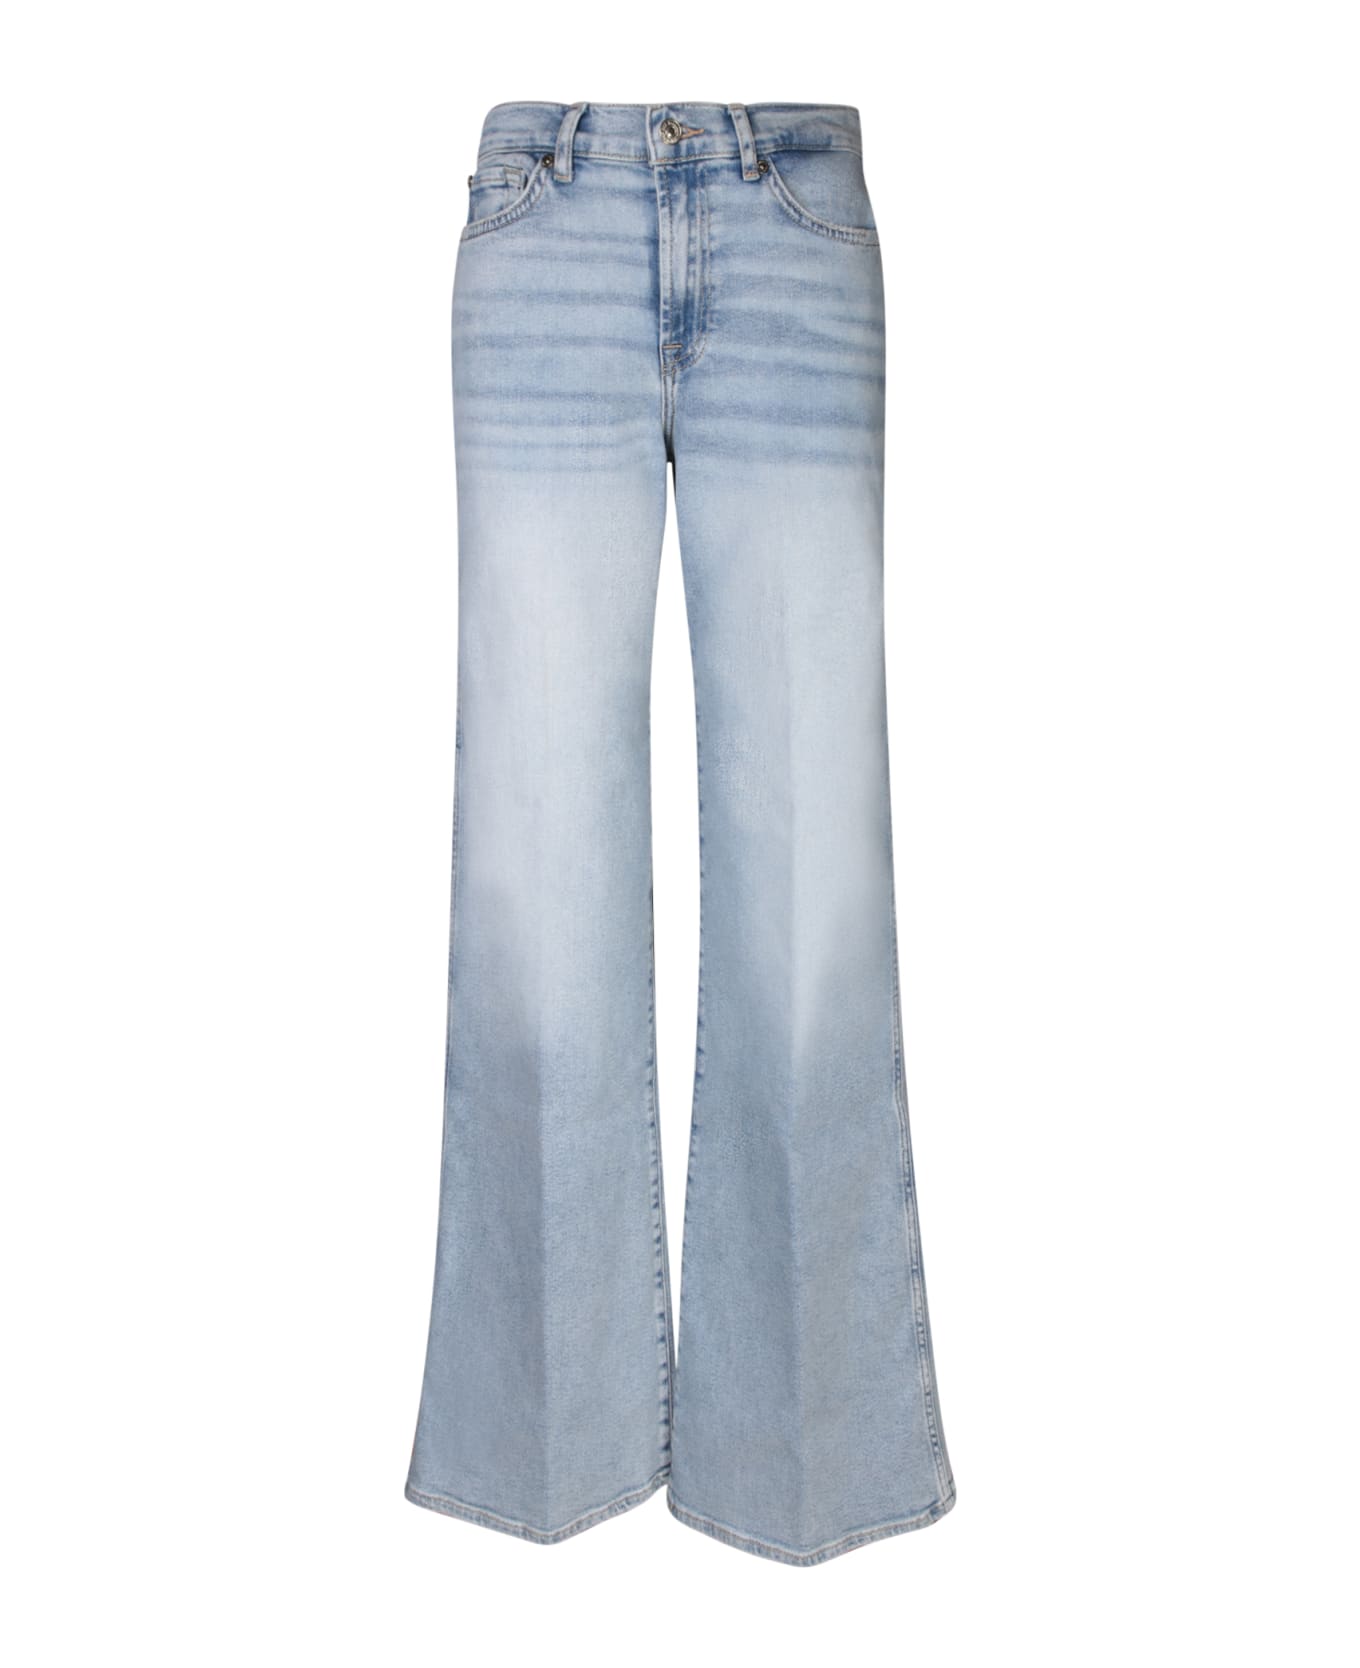 7 For All Mankind Lotta Light Blue Jeans - Blue